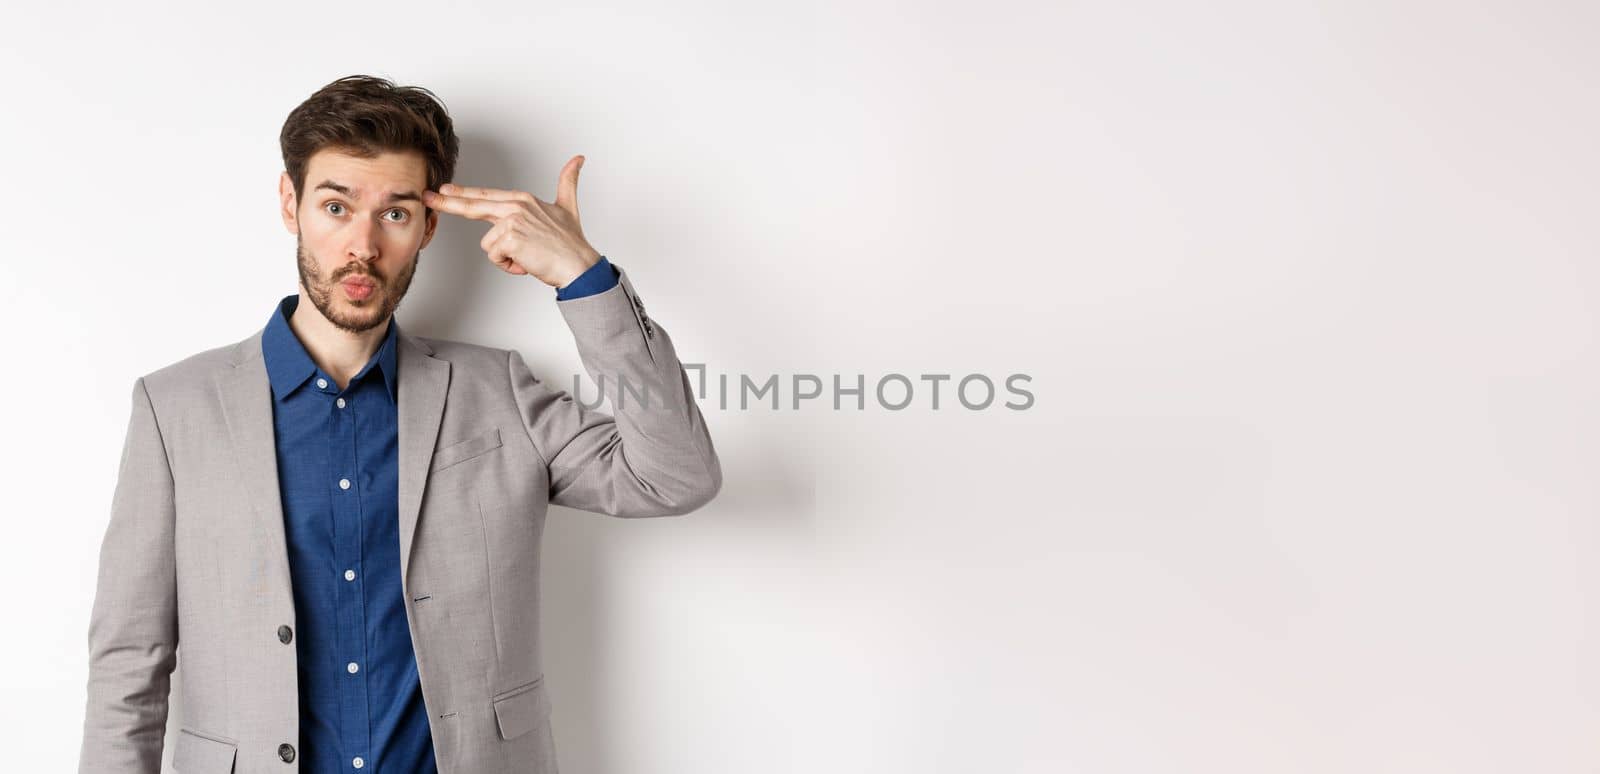 Annoyed guy in business suit shoot himself with hand gun near head, look distressed and tired after work, standing on white background.